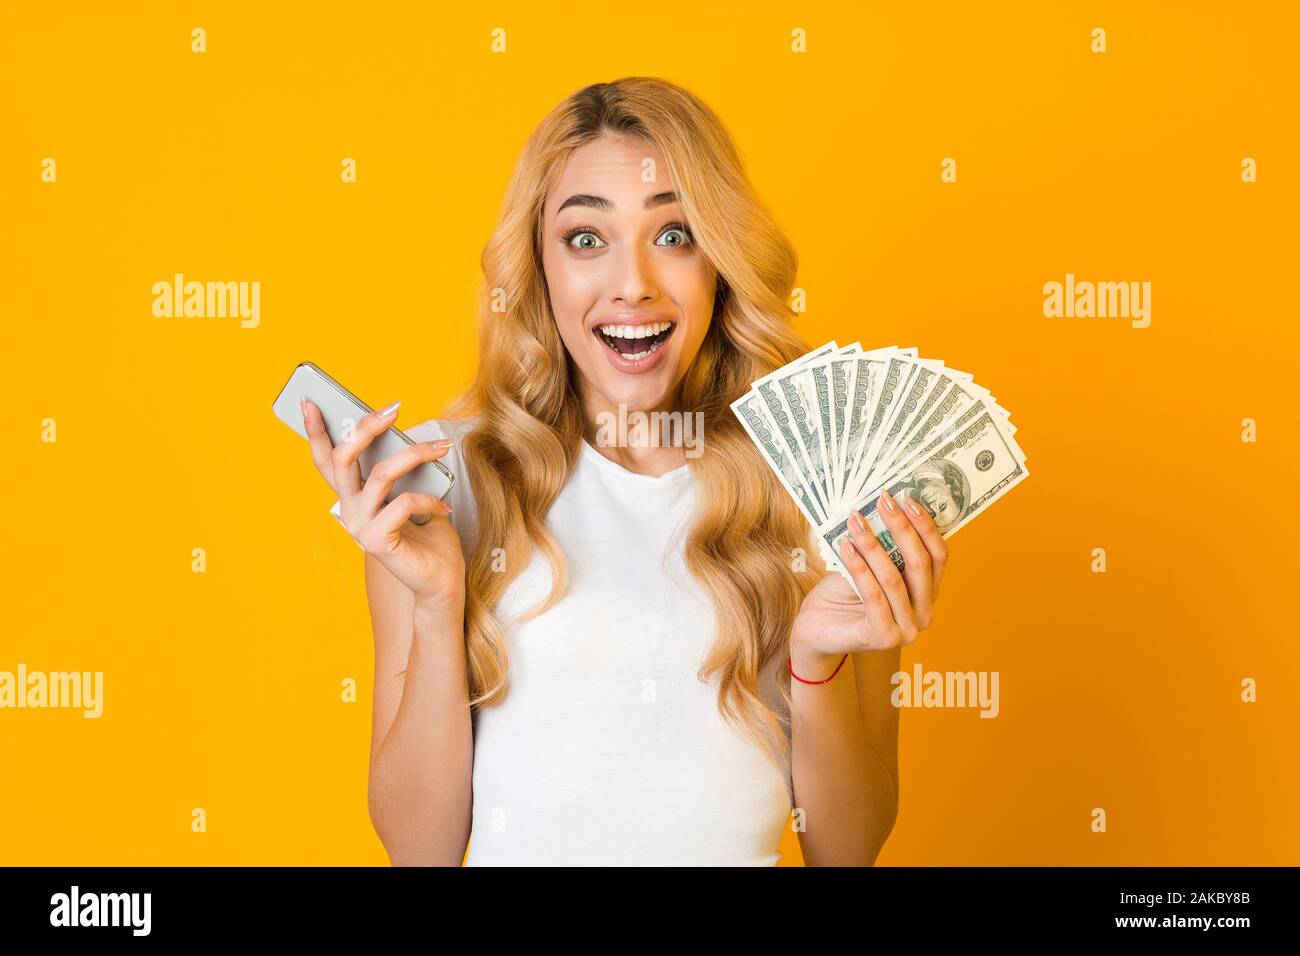 Make money online. Excited woman holding smartphone and bunch of money over  yellow background Stock Photo - Alamy